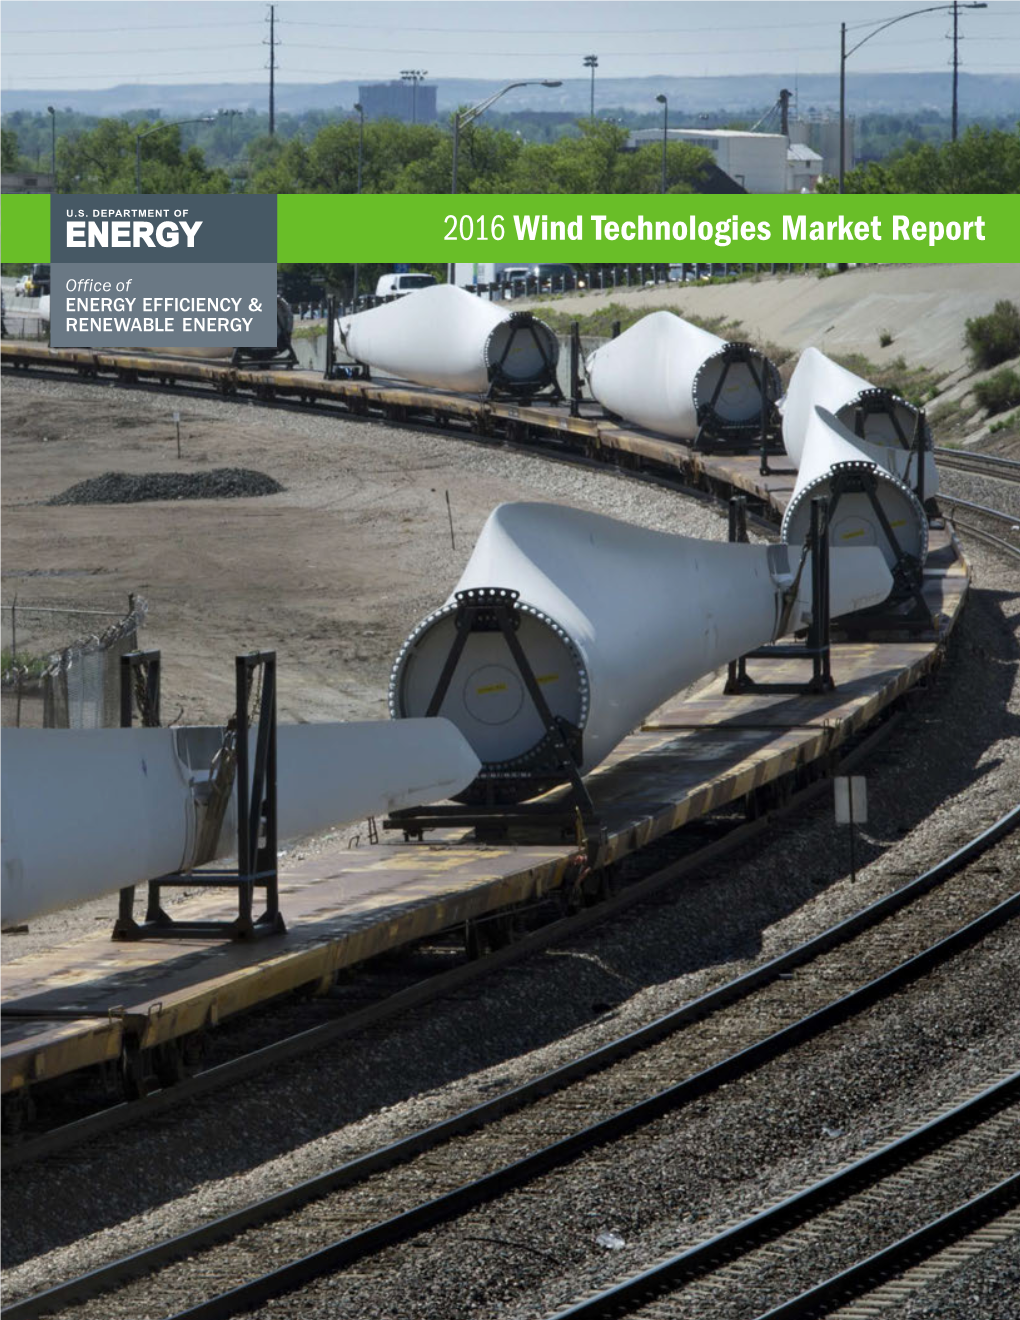 2016 Wind Technologies Market Report This Report Is Being Disseminated by the U.S